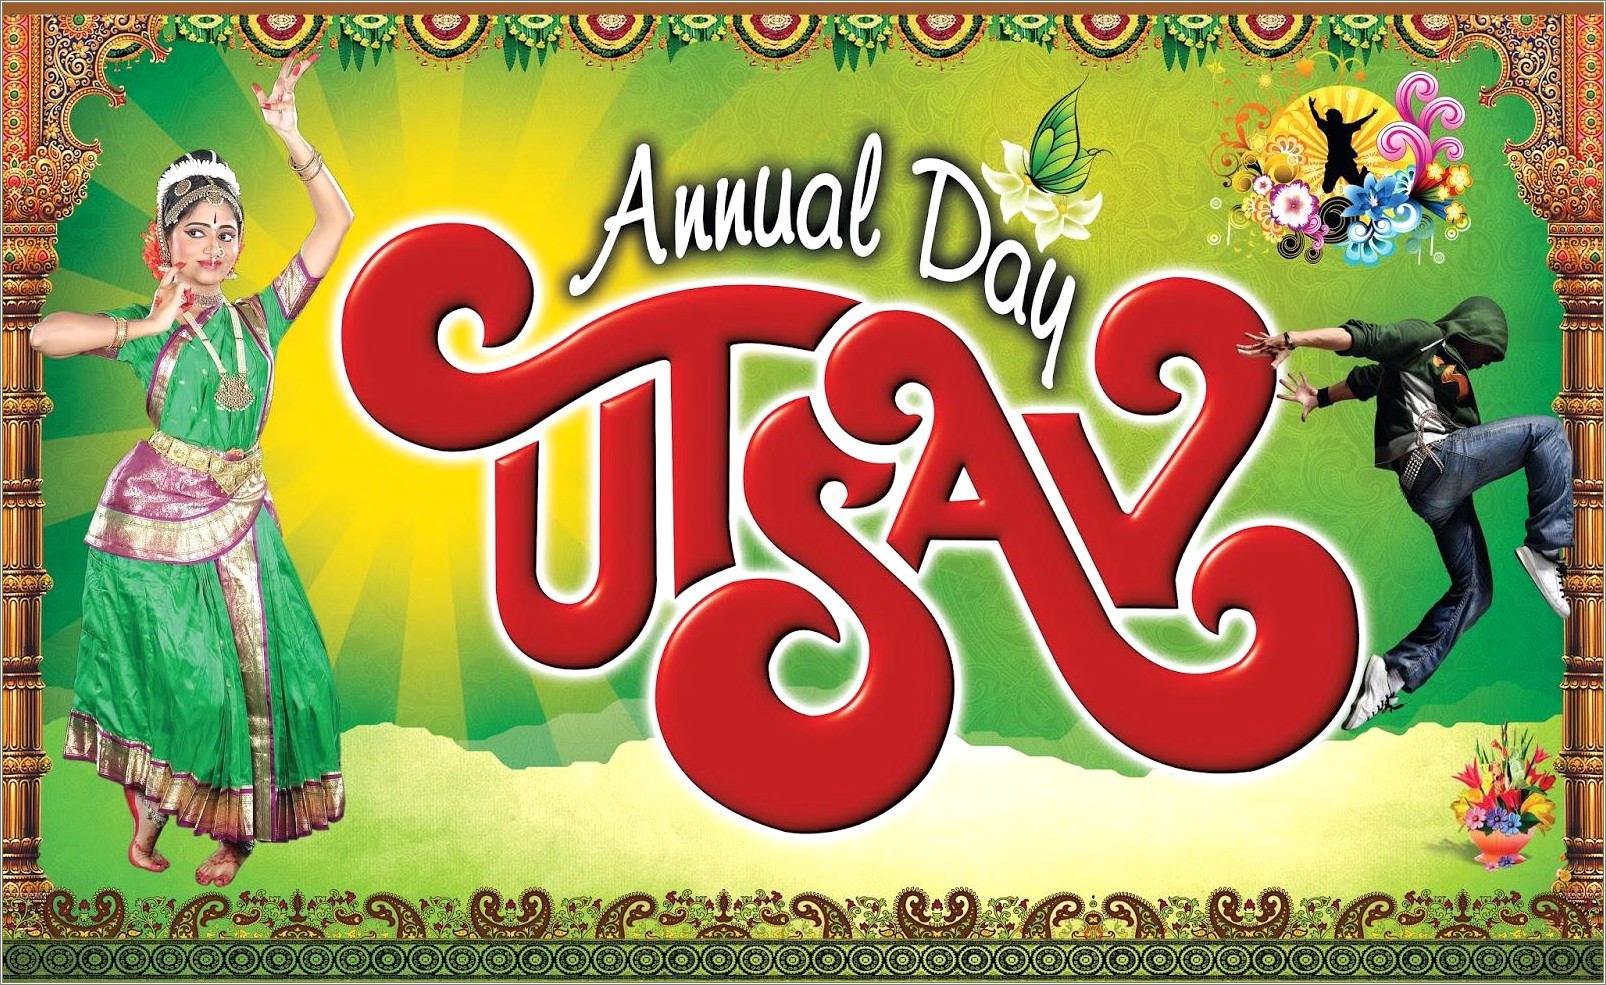 Annual Day Invitation Card Template Free Download